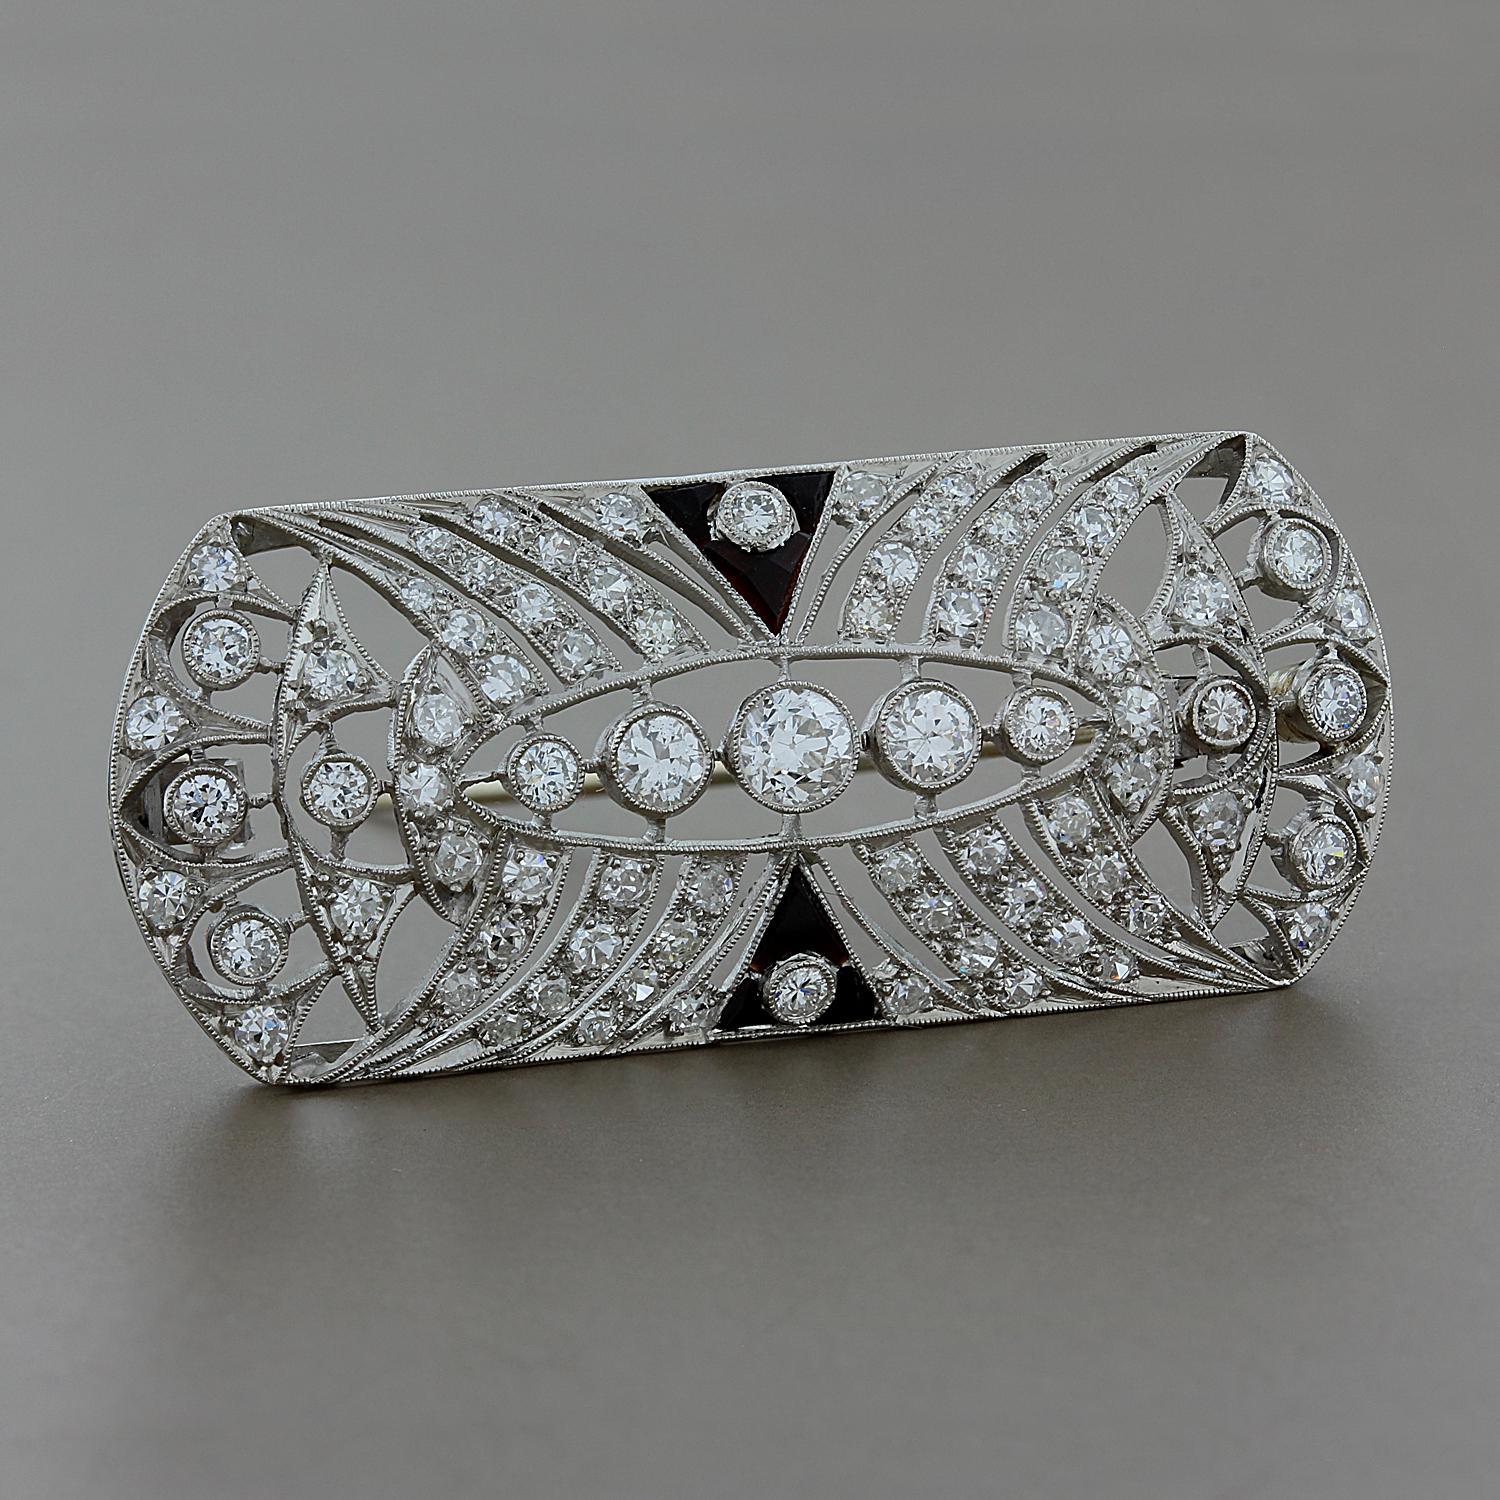 This Art Deco, early 20th century, brooch features antique cut diamonds weighing a total of 1.60 carats, accented by calibré-cut black onyx, set in platinum.

Brooch Length: 1 3/4 inches
Brooch Width: ¾ inch
